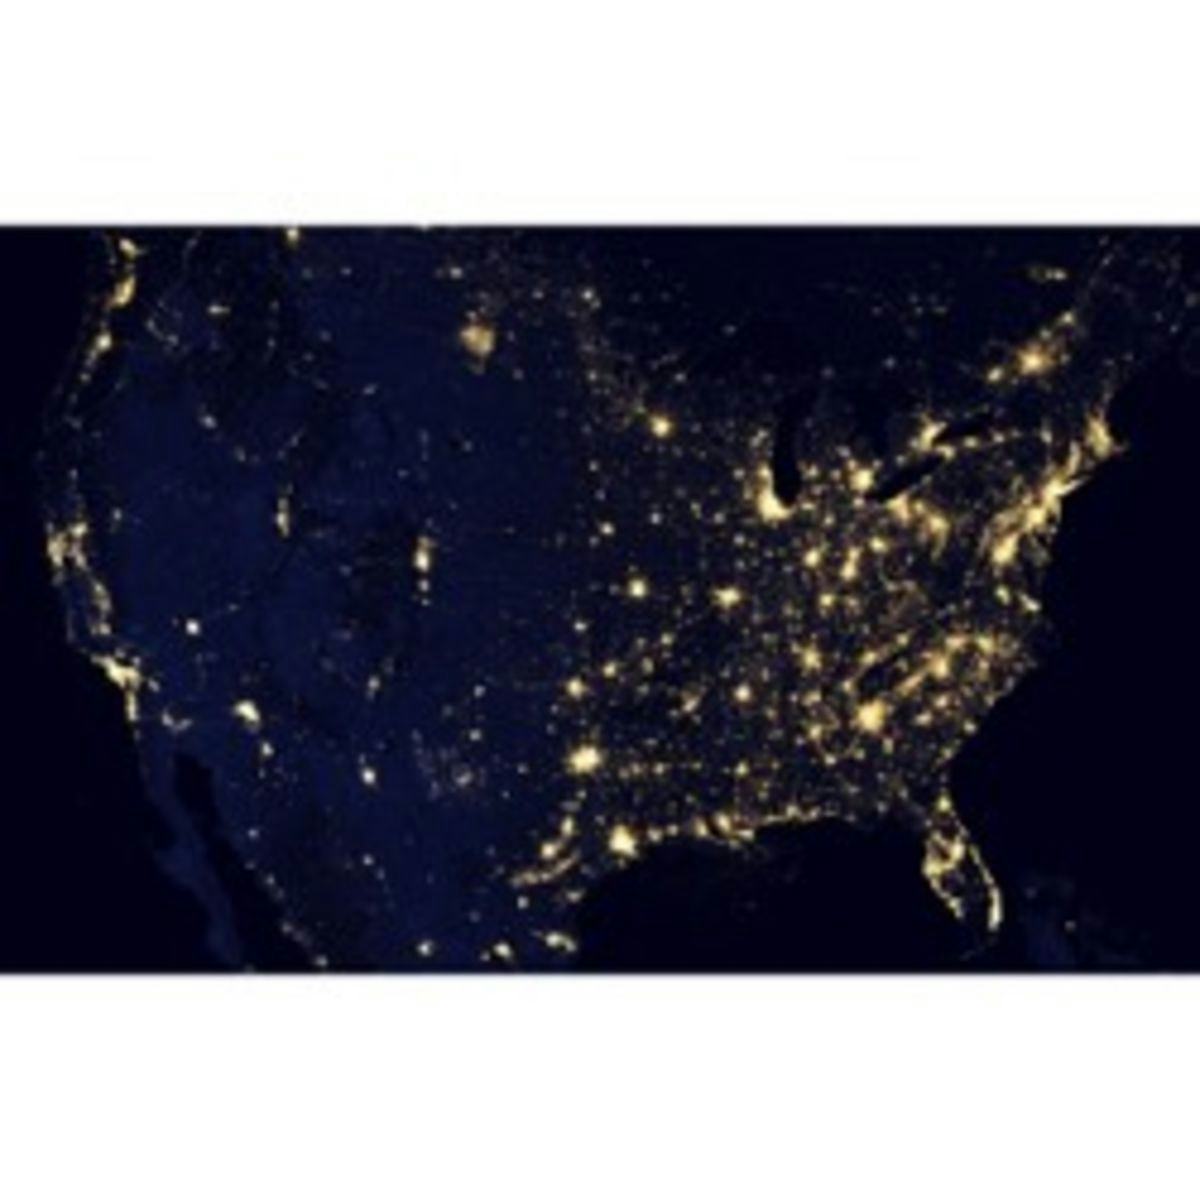 Map of U.S. with lights